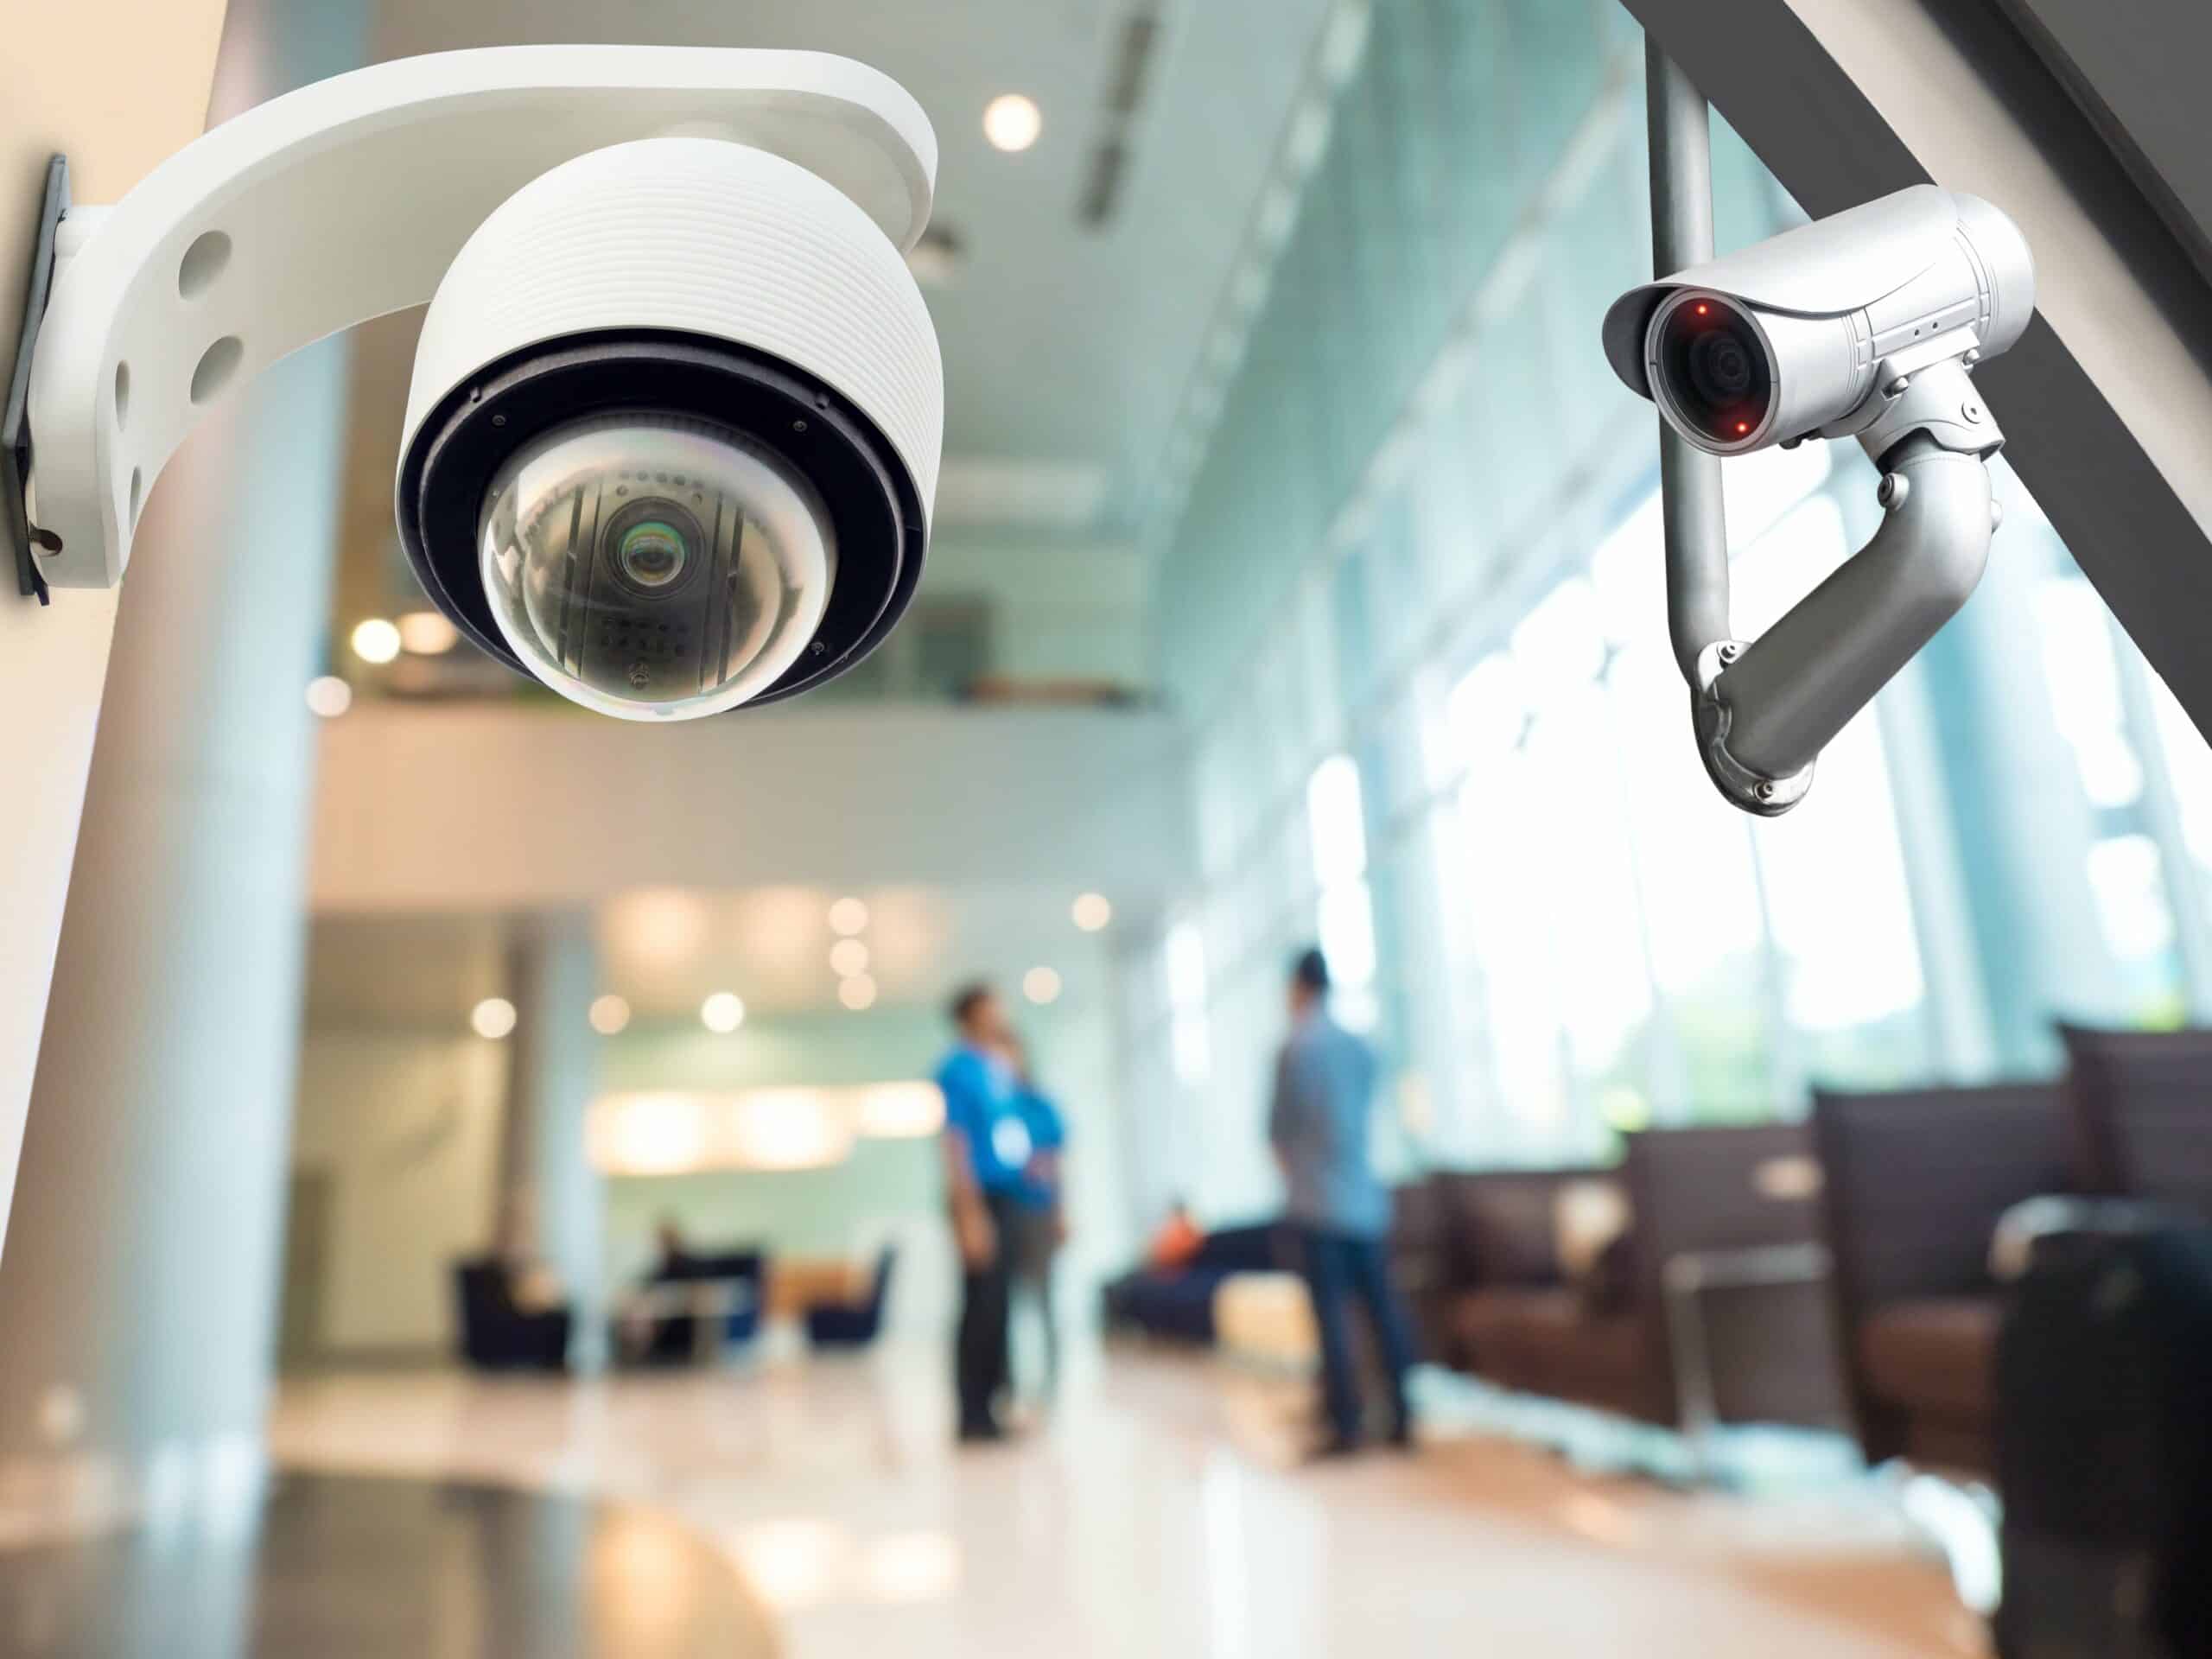 Protecting Your Assets: How CCTV Can Safeguard Your Home or Business